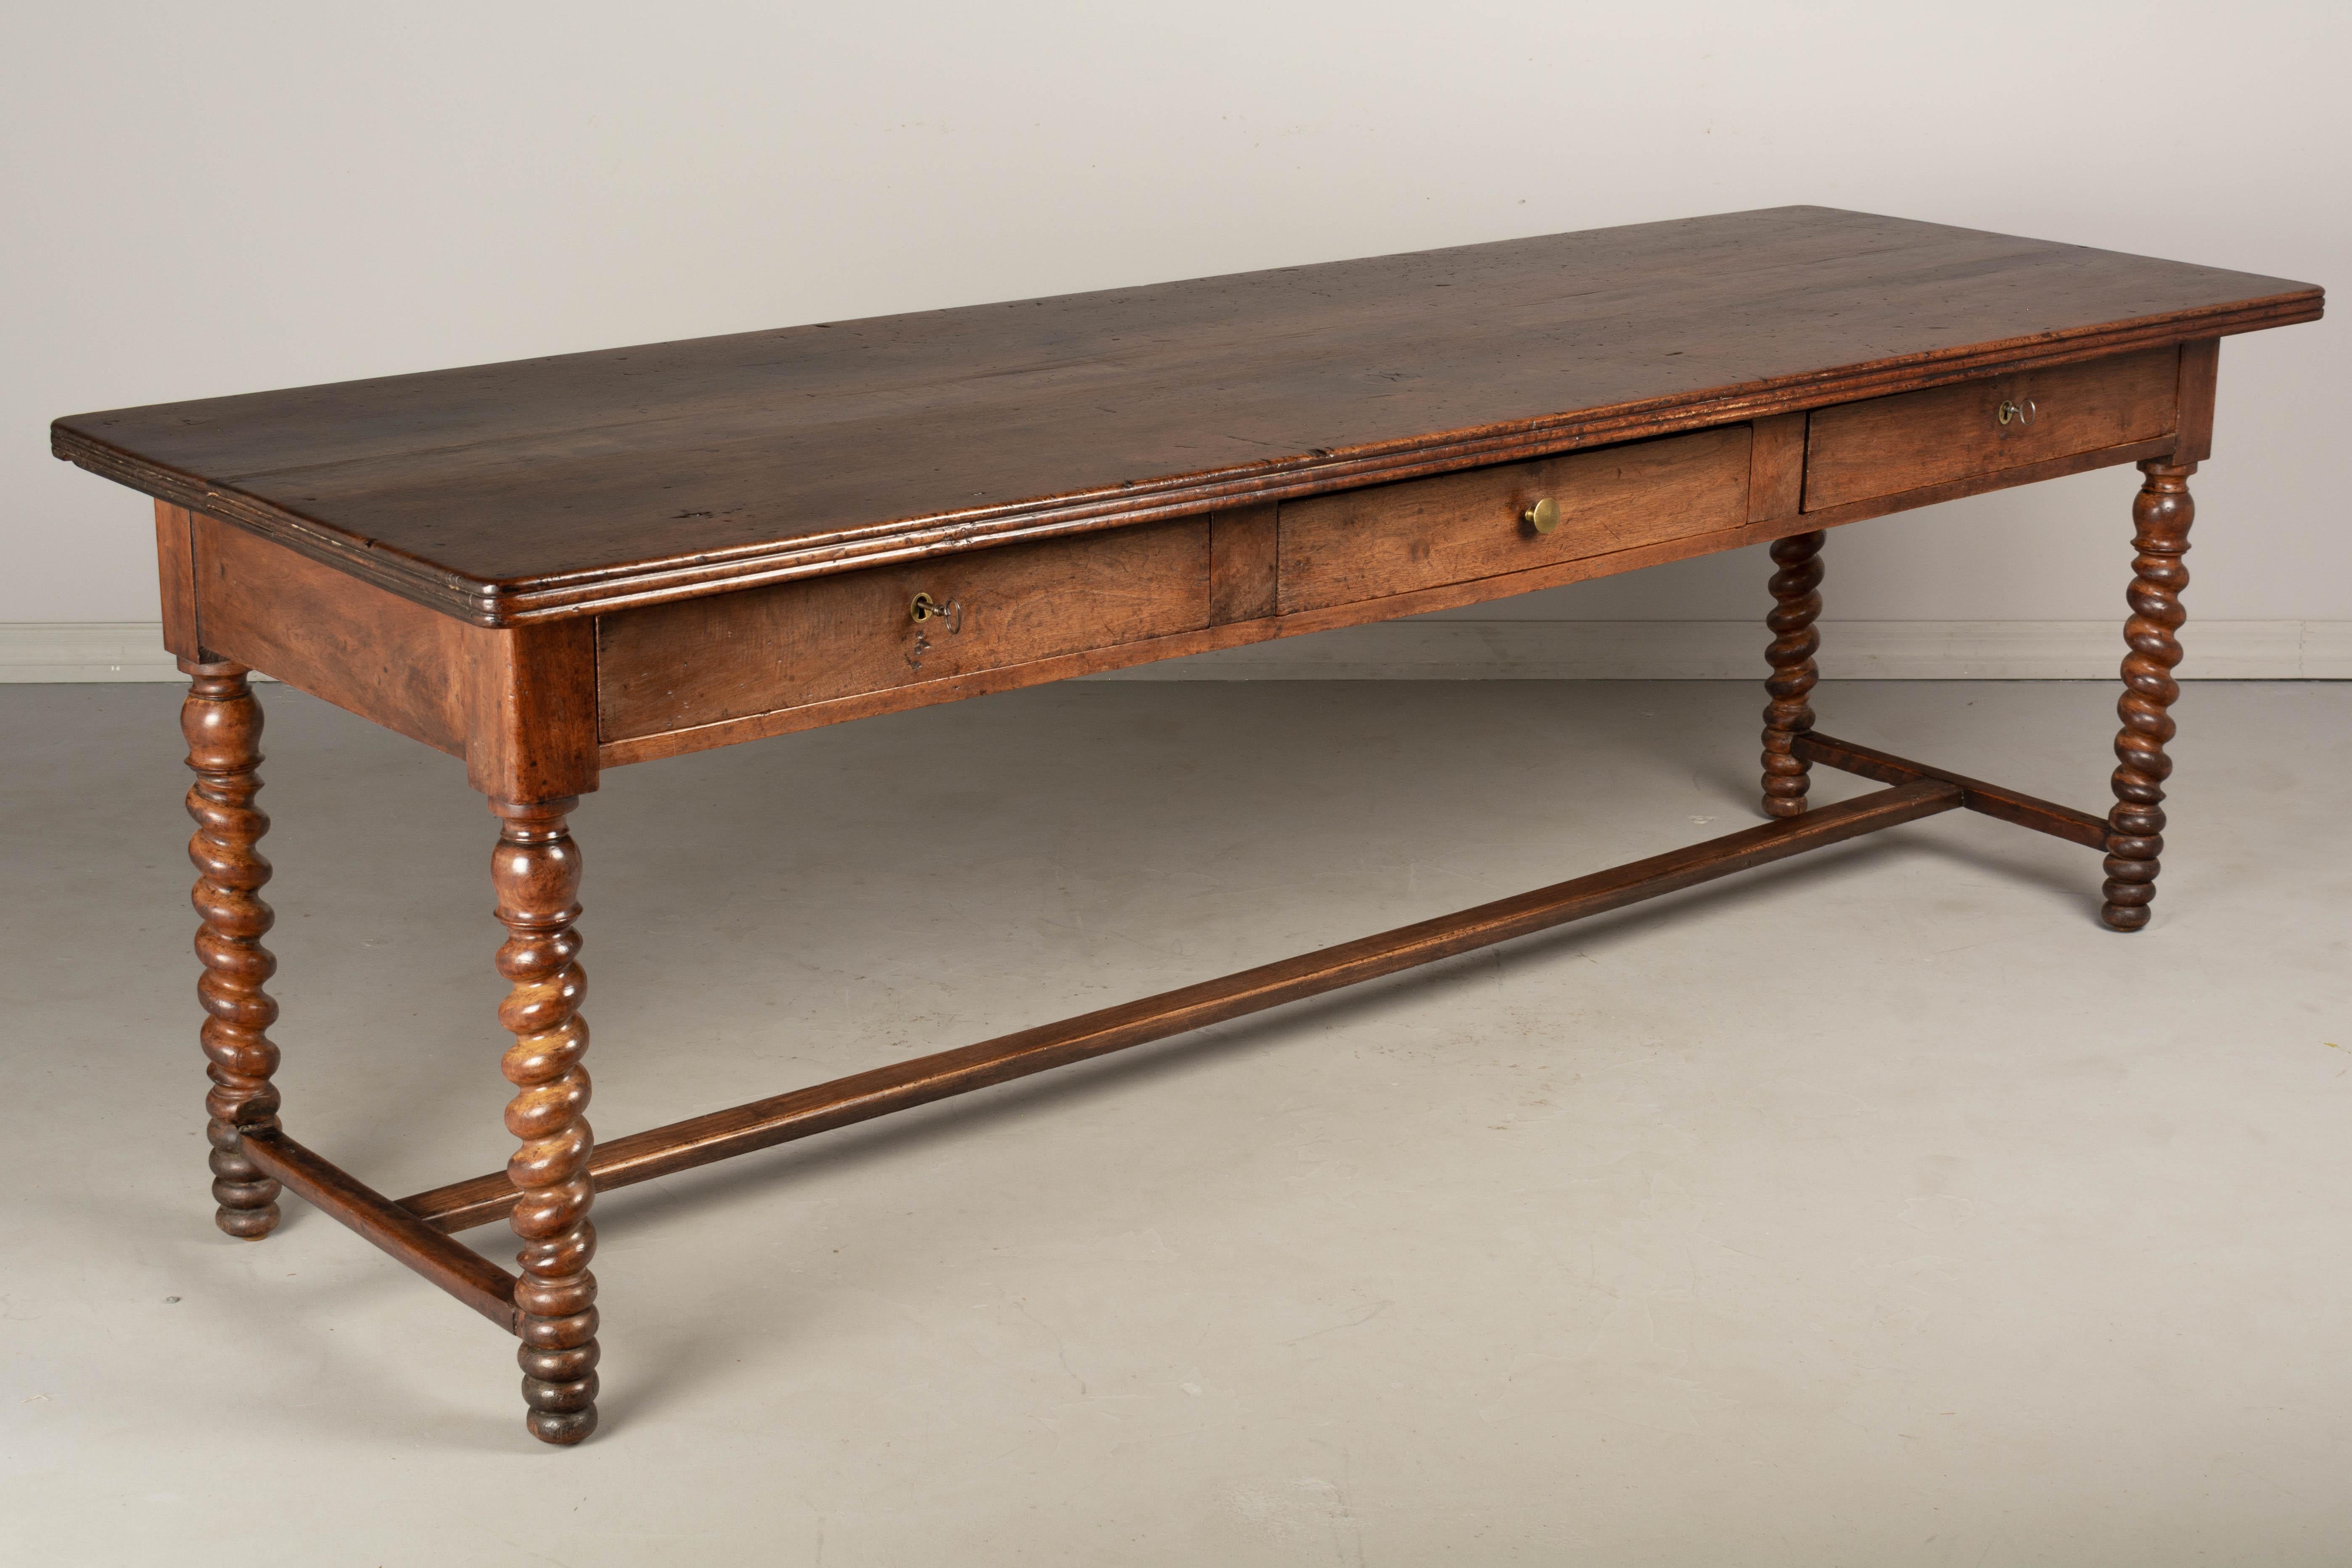 A 19th century Louis Philippe style French table de drapier or draper's table, made of solid walnut. The top is made from three 1.5